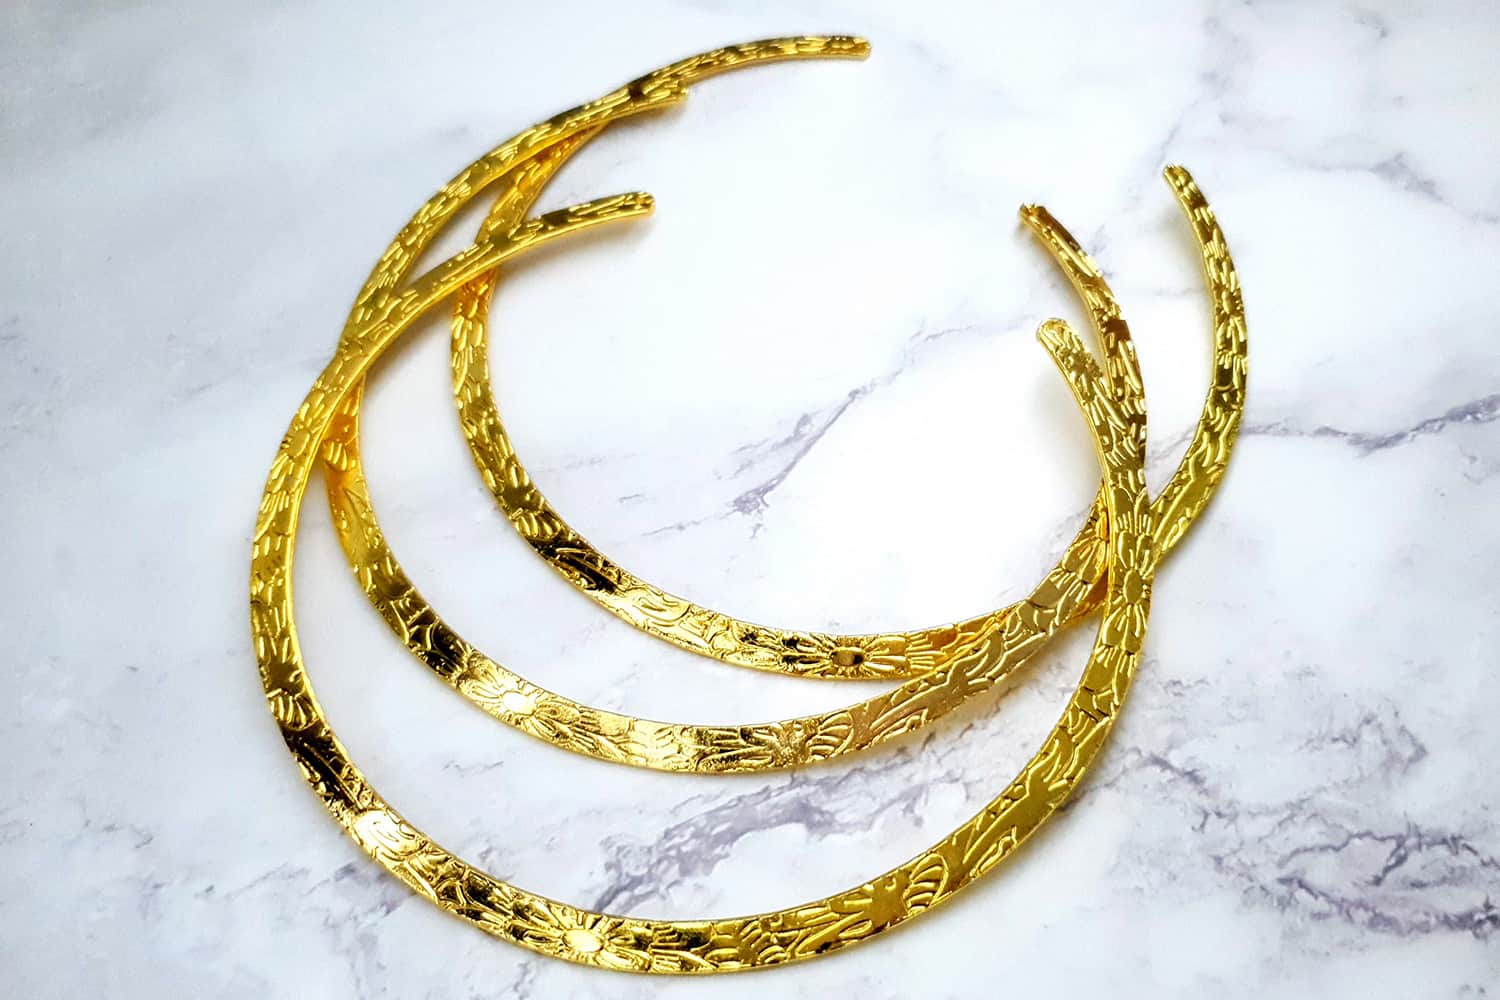 3 Pieces Of Golden Metal Necklaces For Pendant (25342)